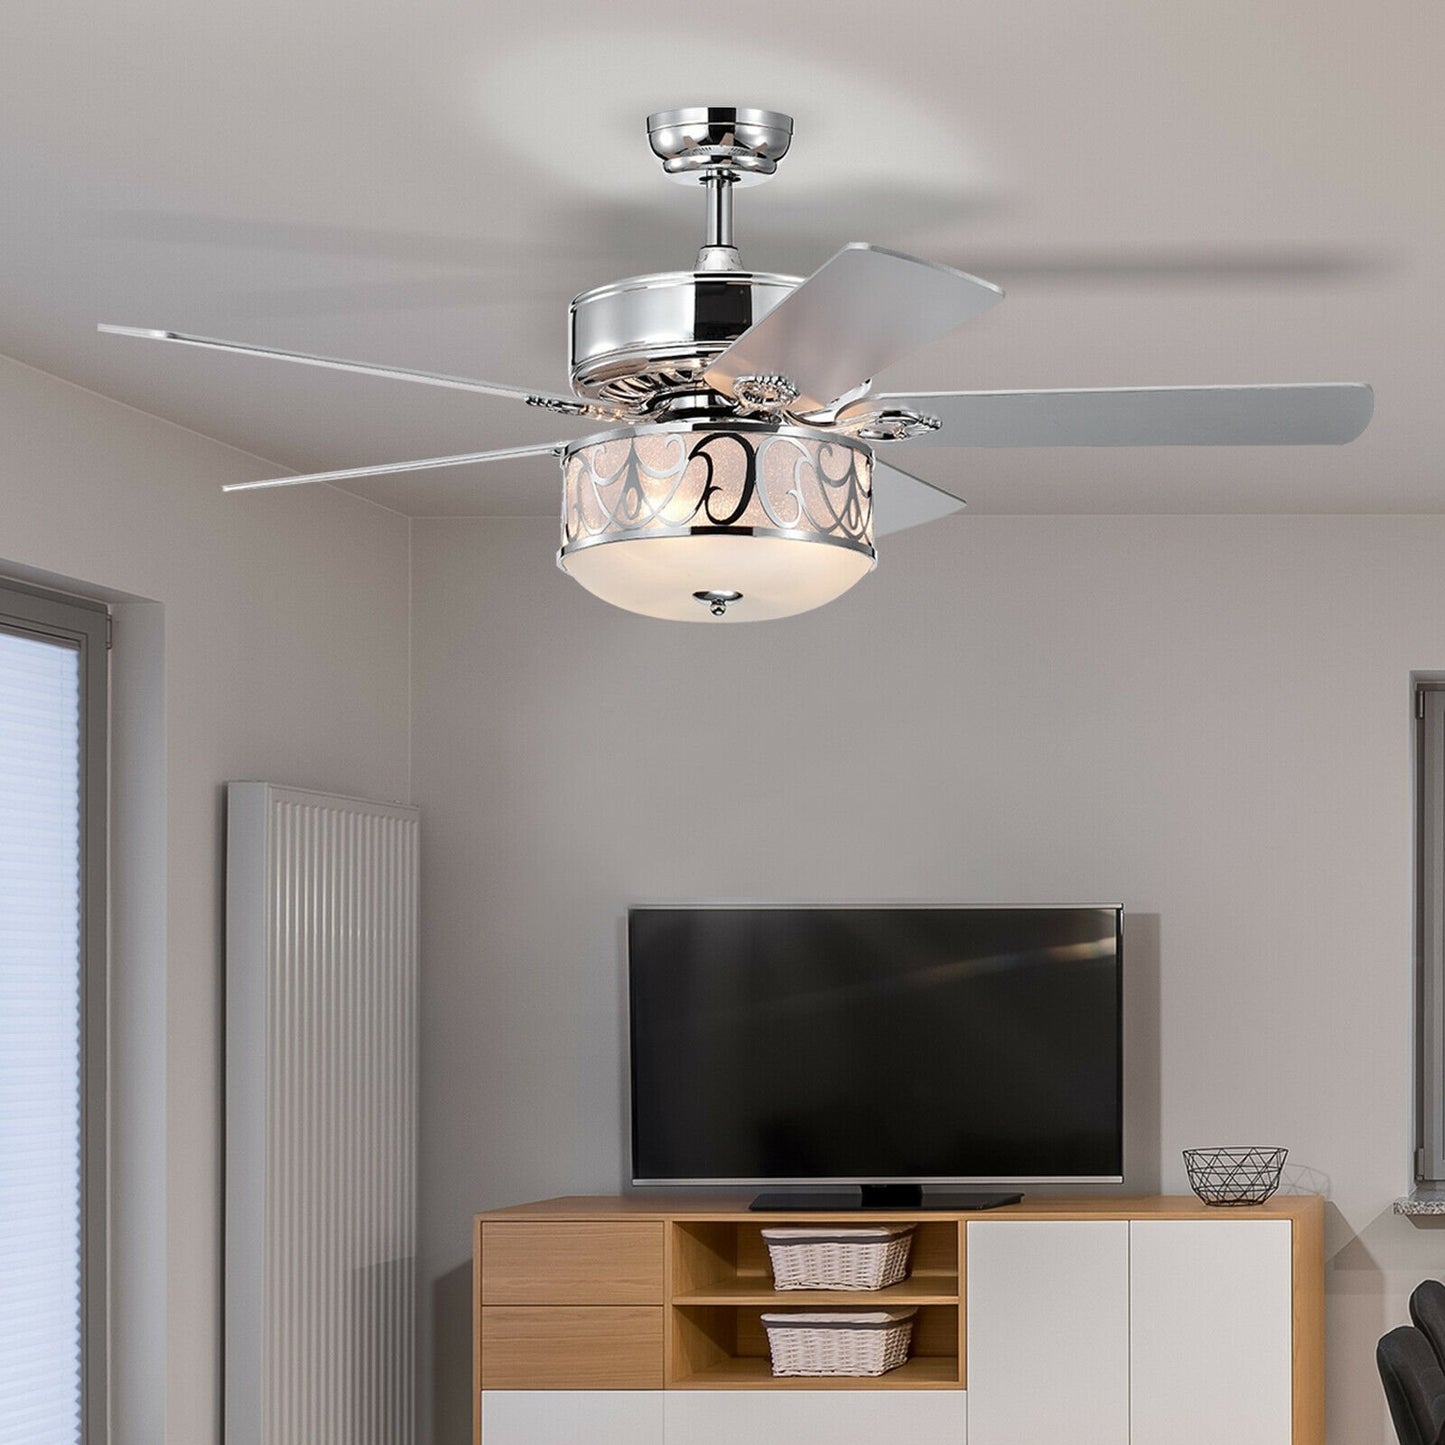 52 Inch Ceiling Fan with Light Reversible Blade and Adjustable Speed, Silver